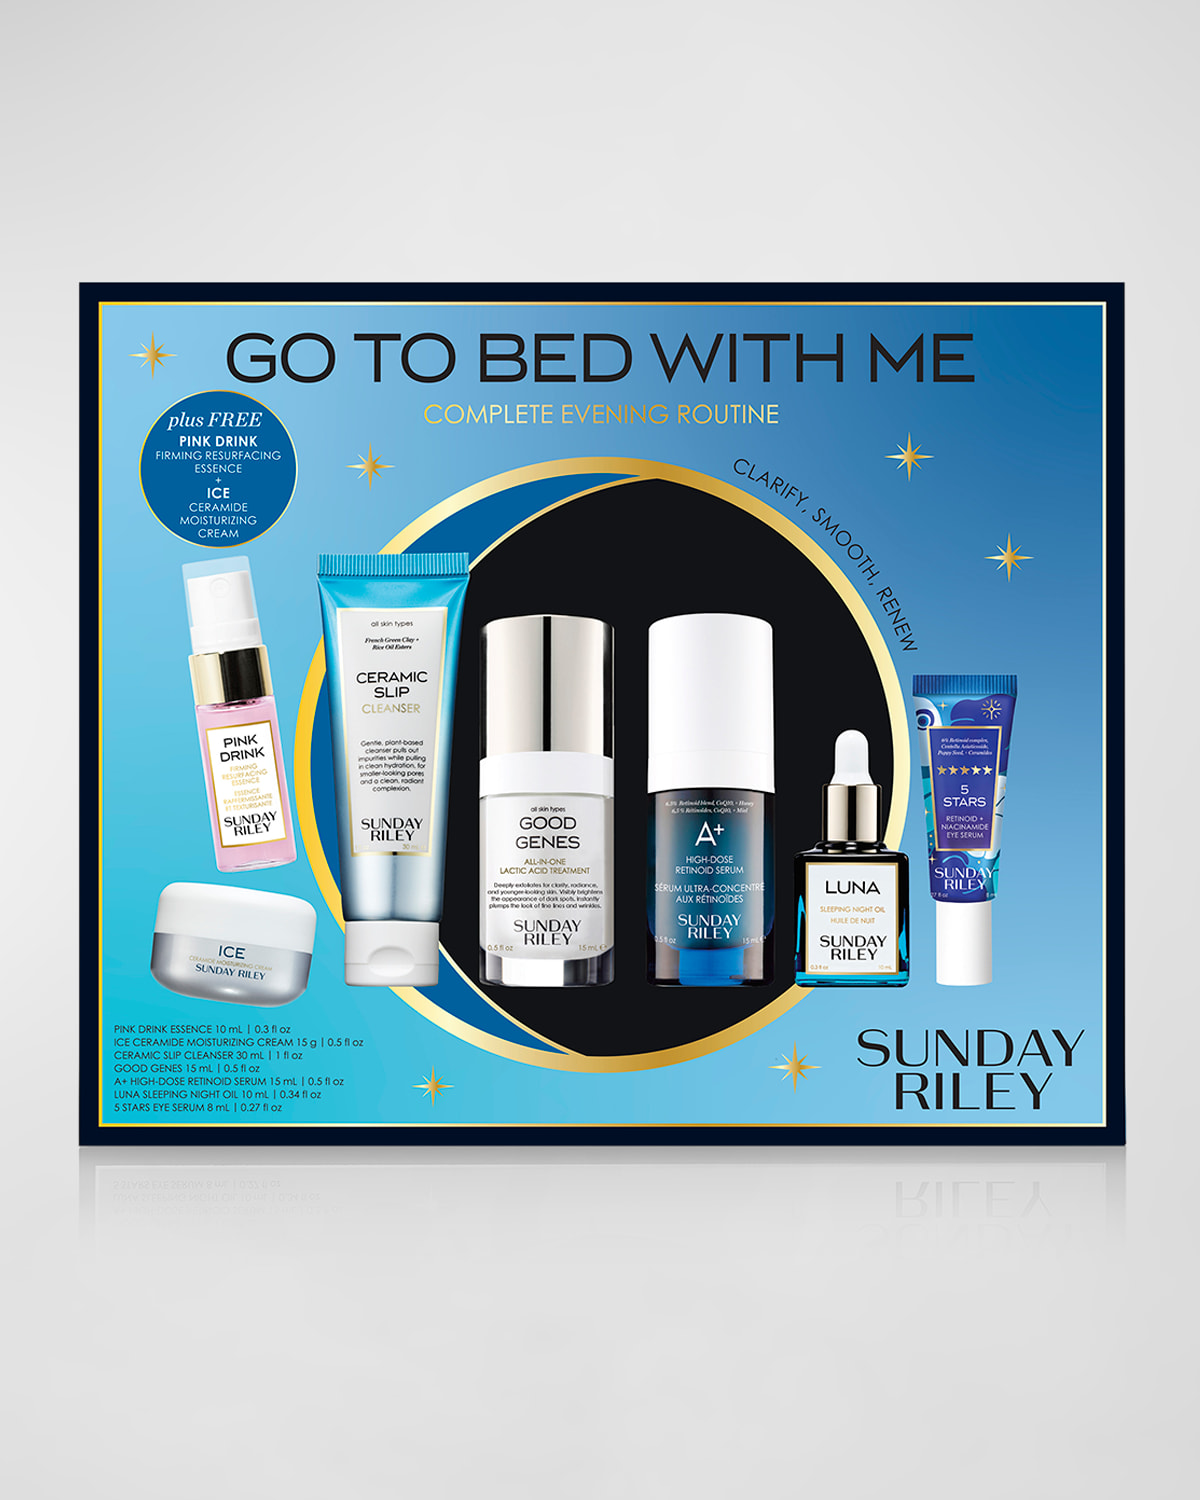 Go To Bed With Me Complete Evening Routine Kit